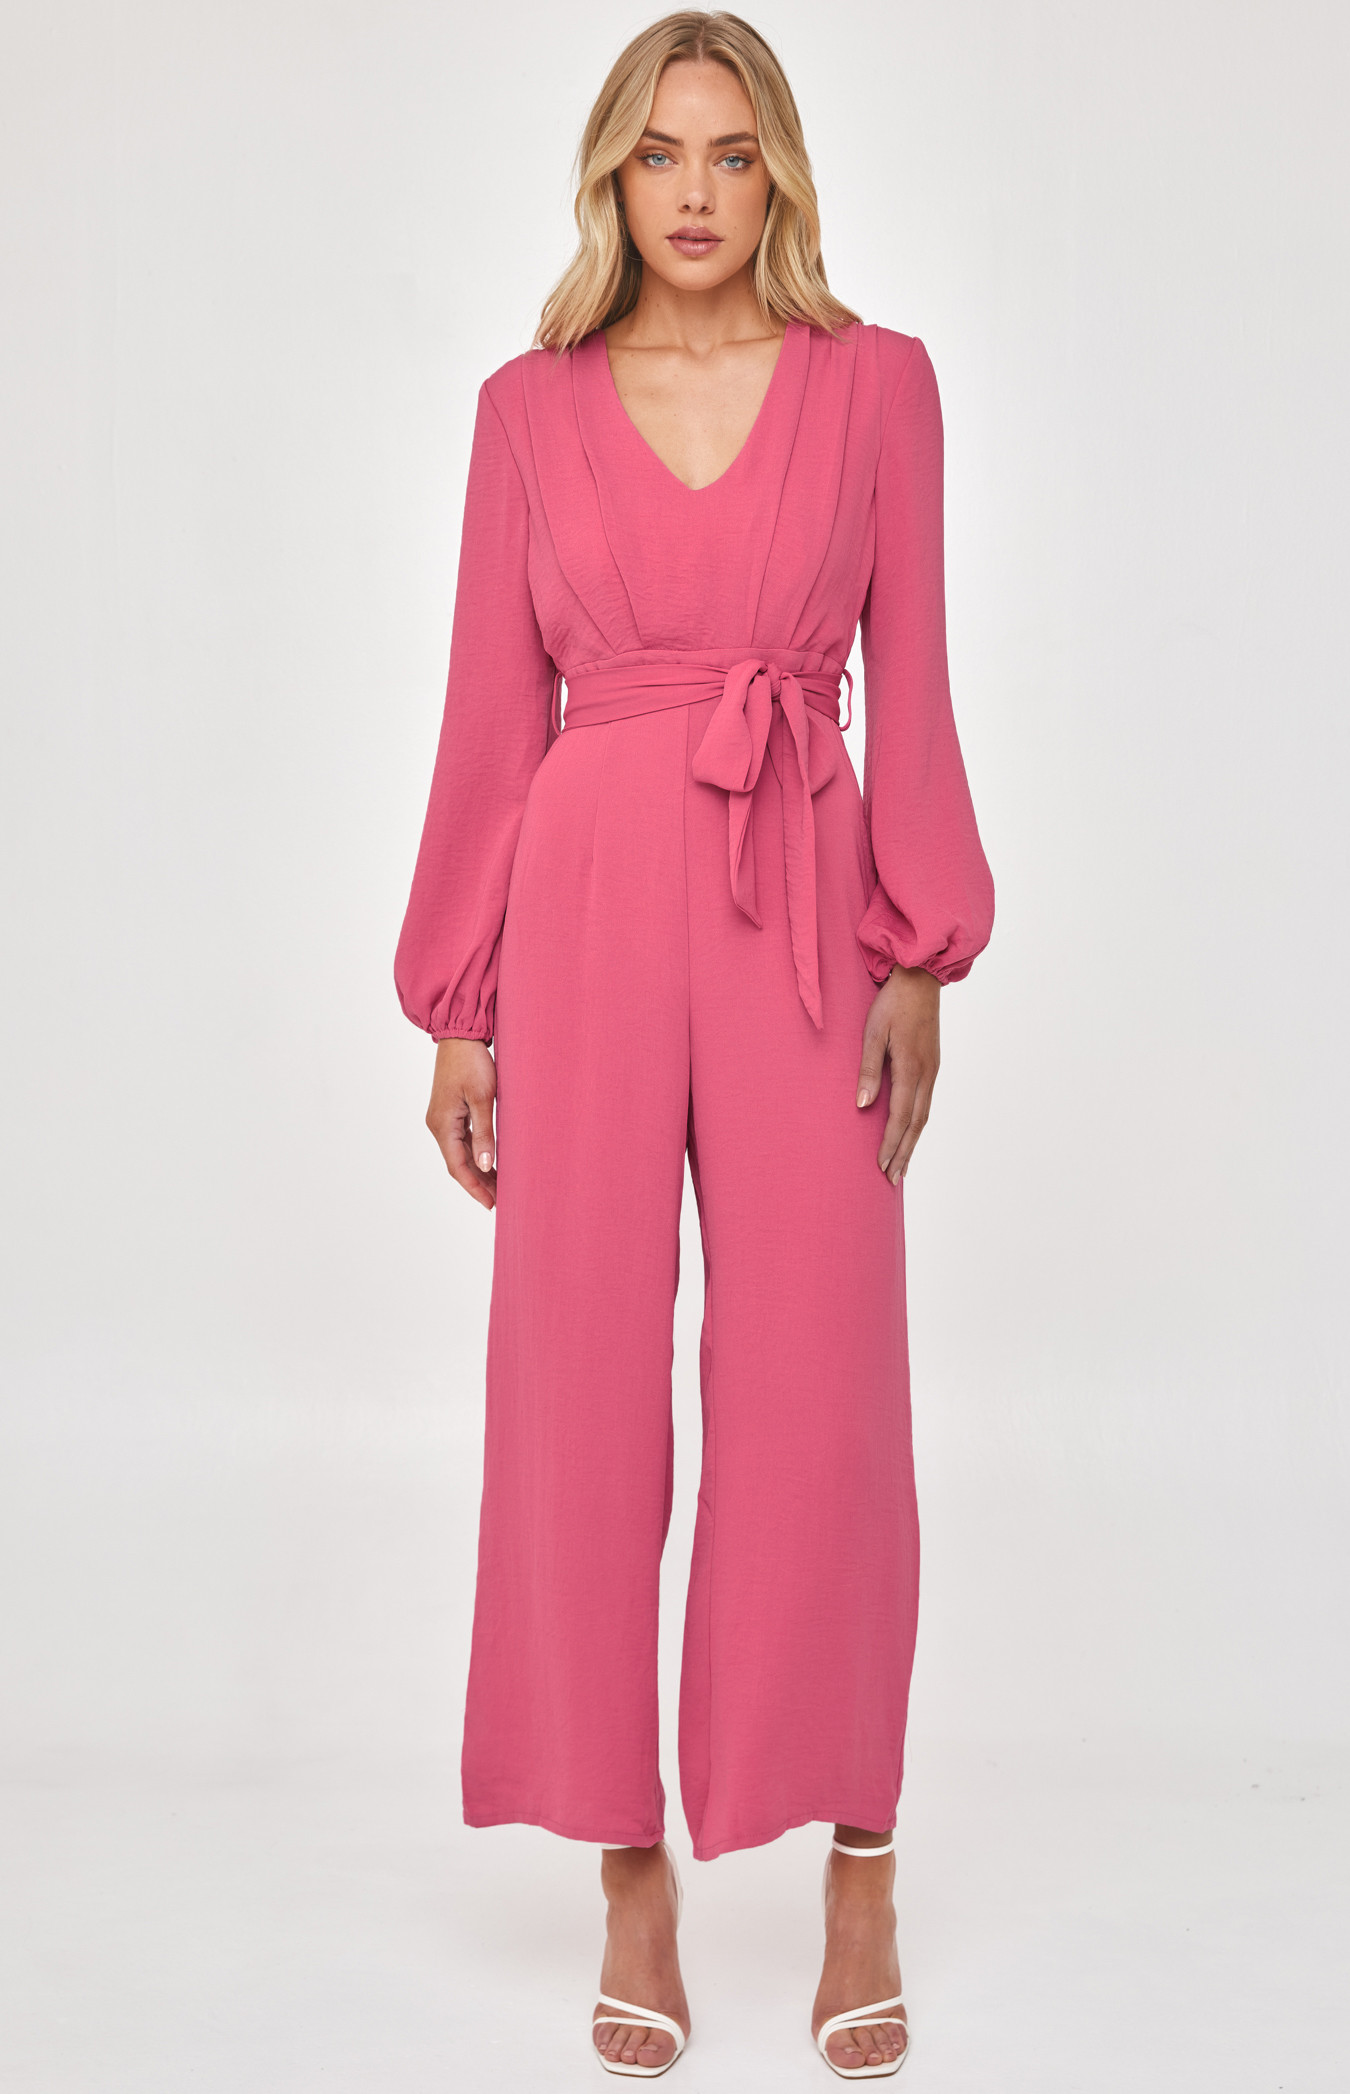 Pleated Detail Bubble Sleeve Jumpsuit with Belt (SJP527A)